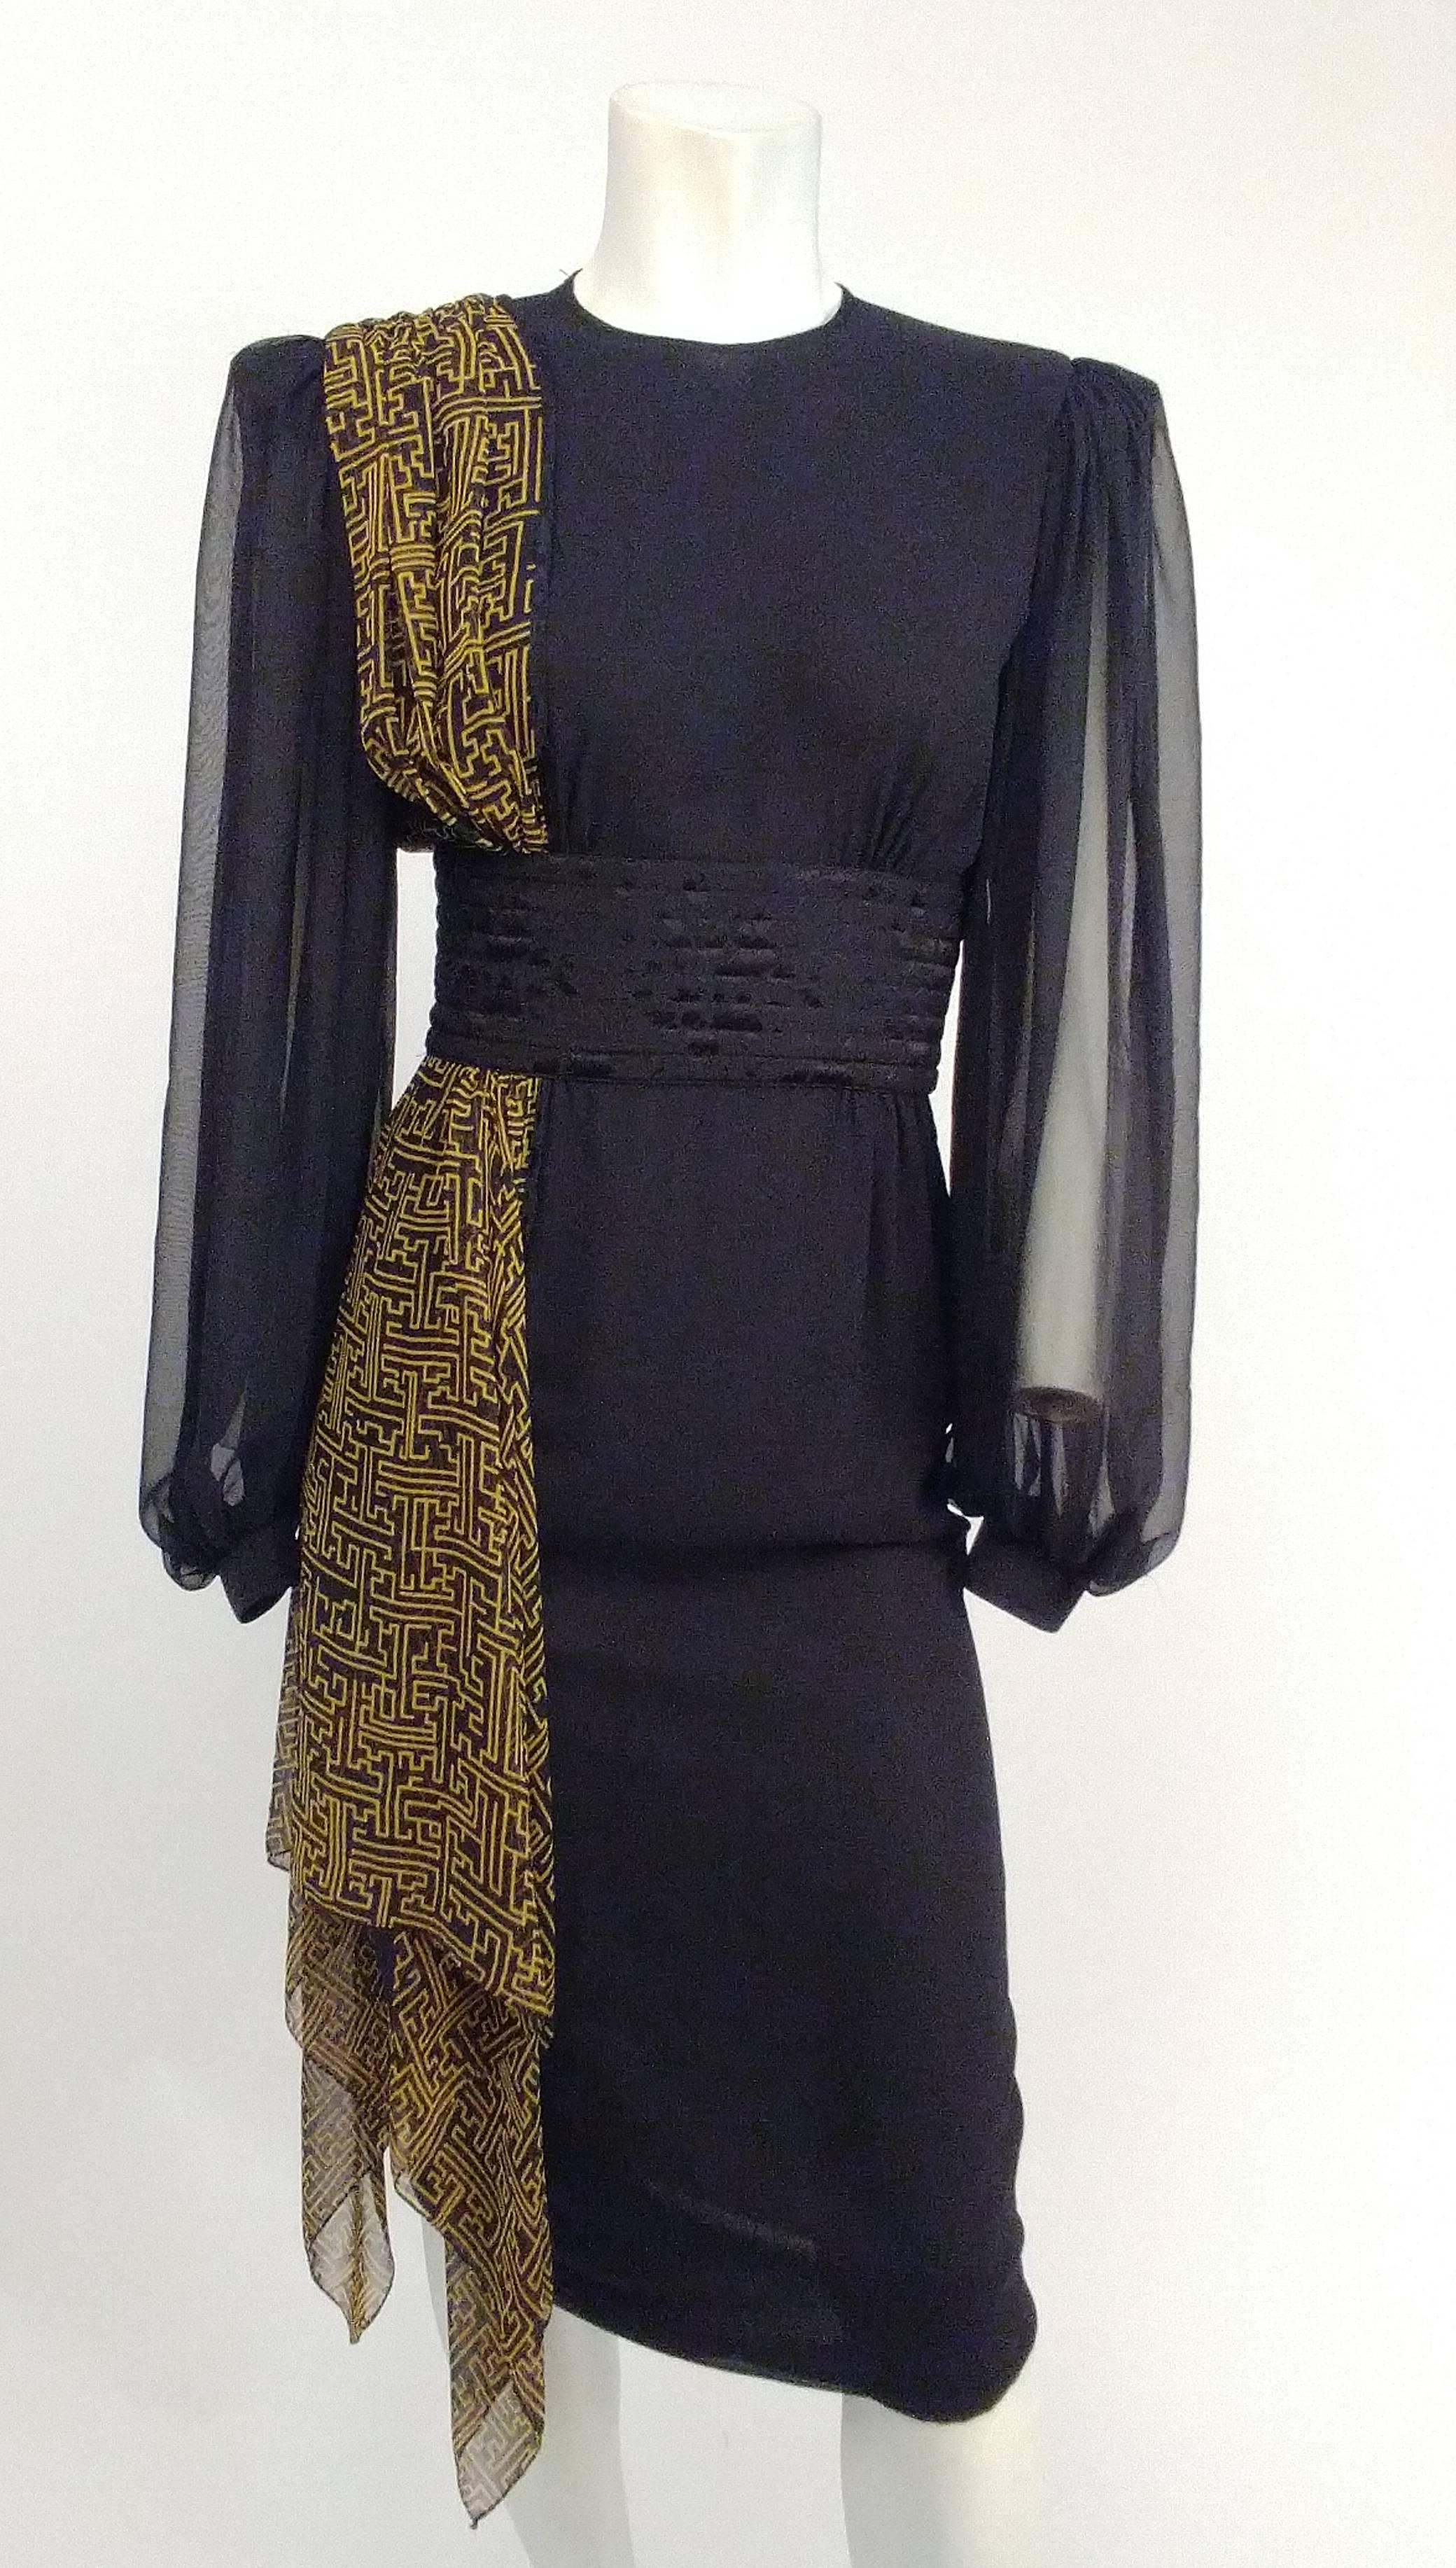 1980s Asymmetric Draped Chiffon Dress. 1940s inspired silhouette. Geometric printed chiffon drapes over one shoulder of dress, ends with a kerchief hem. Top stitched jacquard wide belt cinches in waist. Gorgeous full chiffon sleeves. Zips up back to